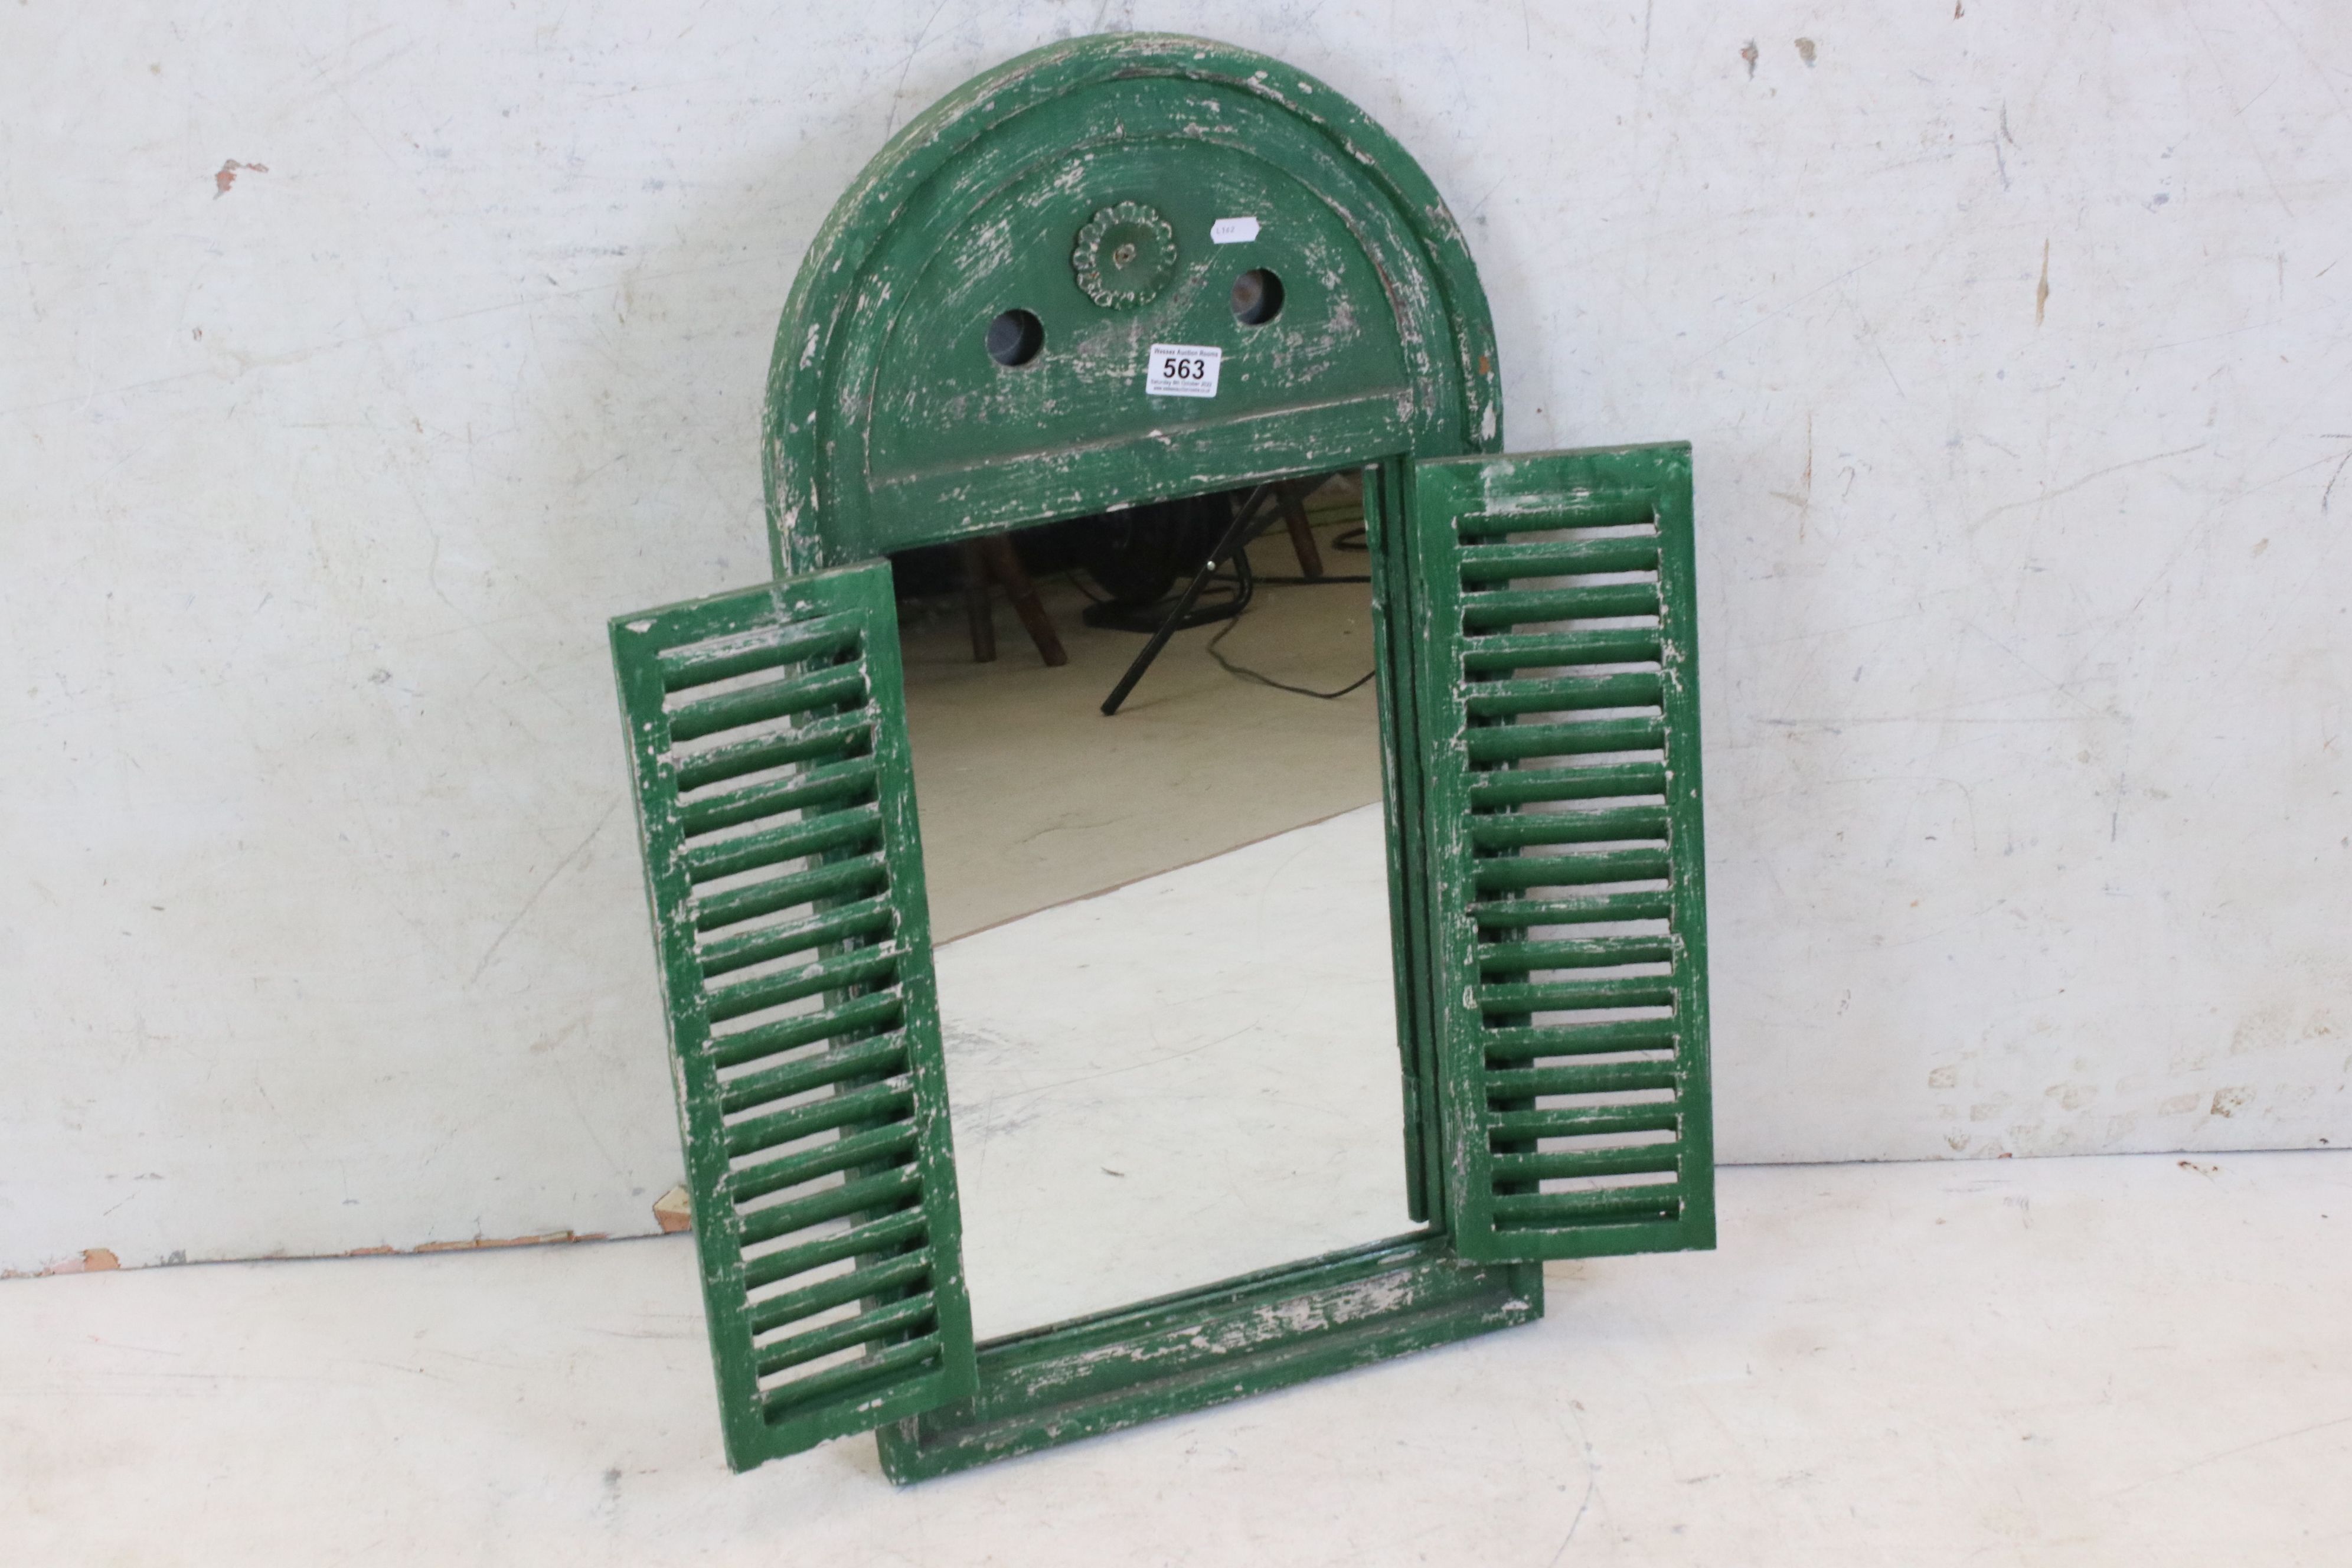 Green Painted Arched Door, the two slatted doors opening to a mirror, 75cm x 39cm